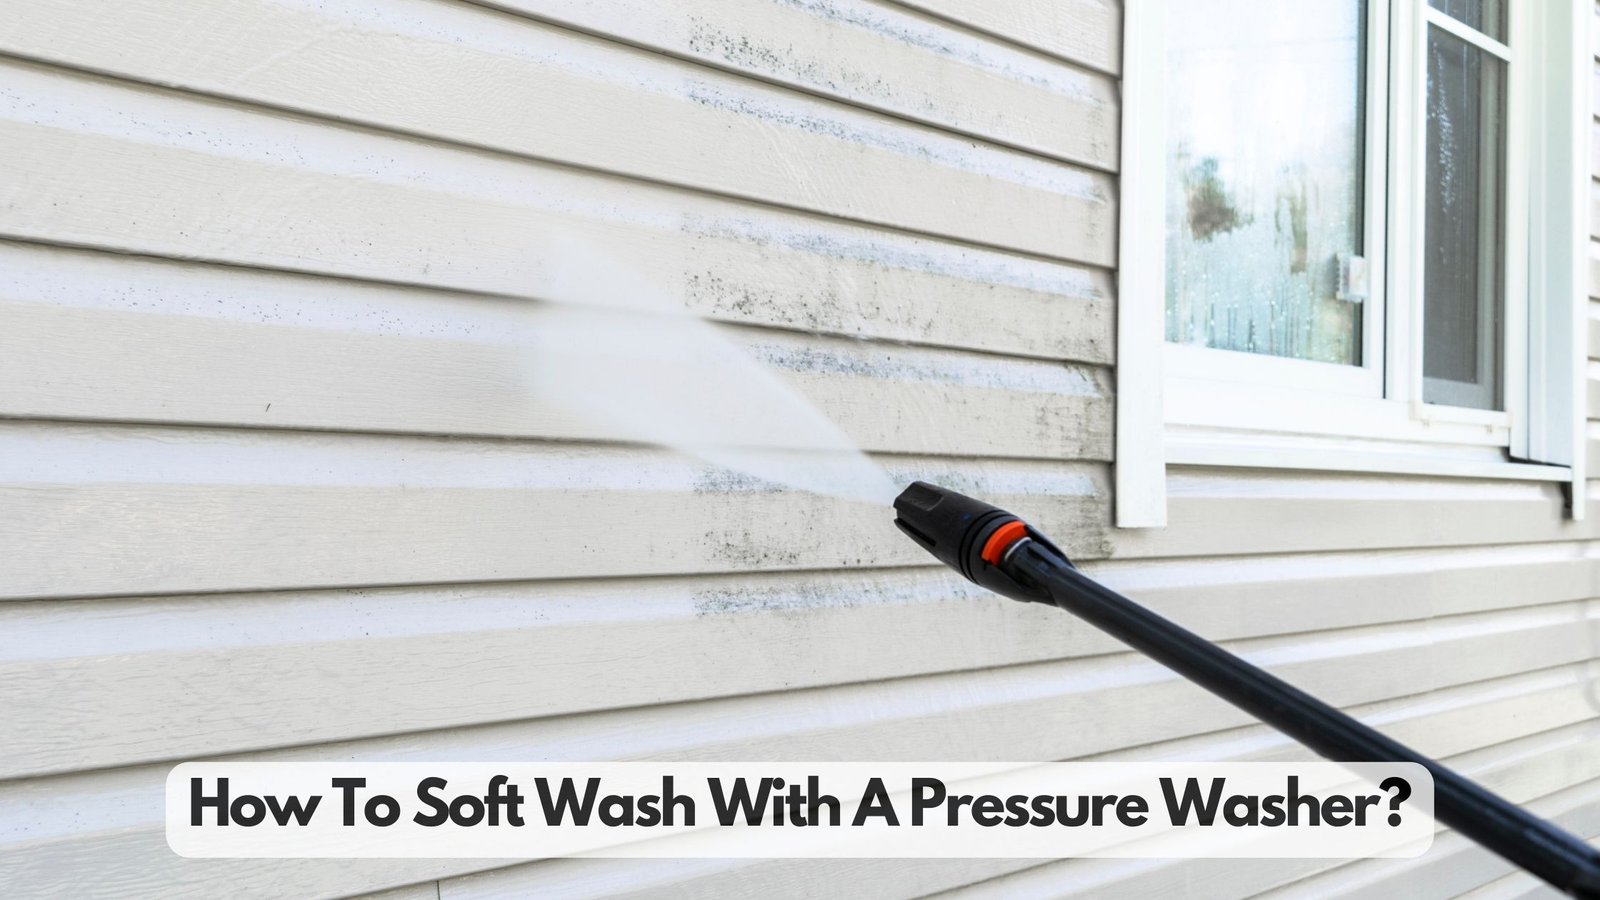 Soft Wash With A Pressure Washer